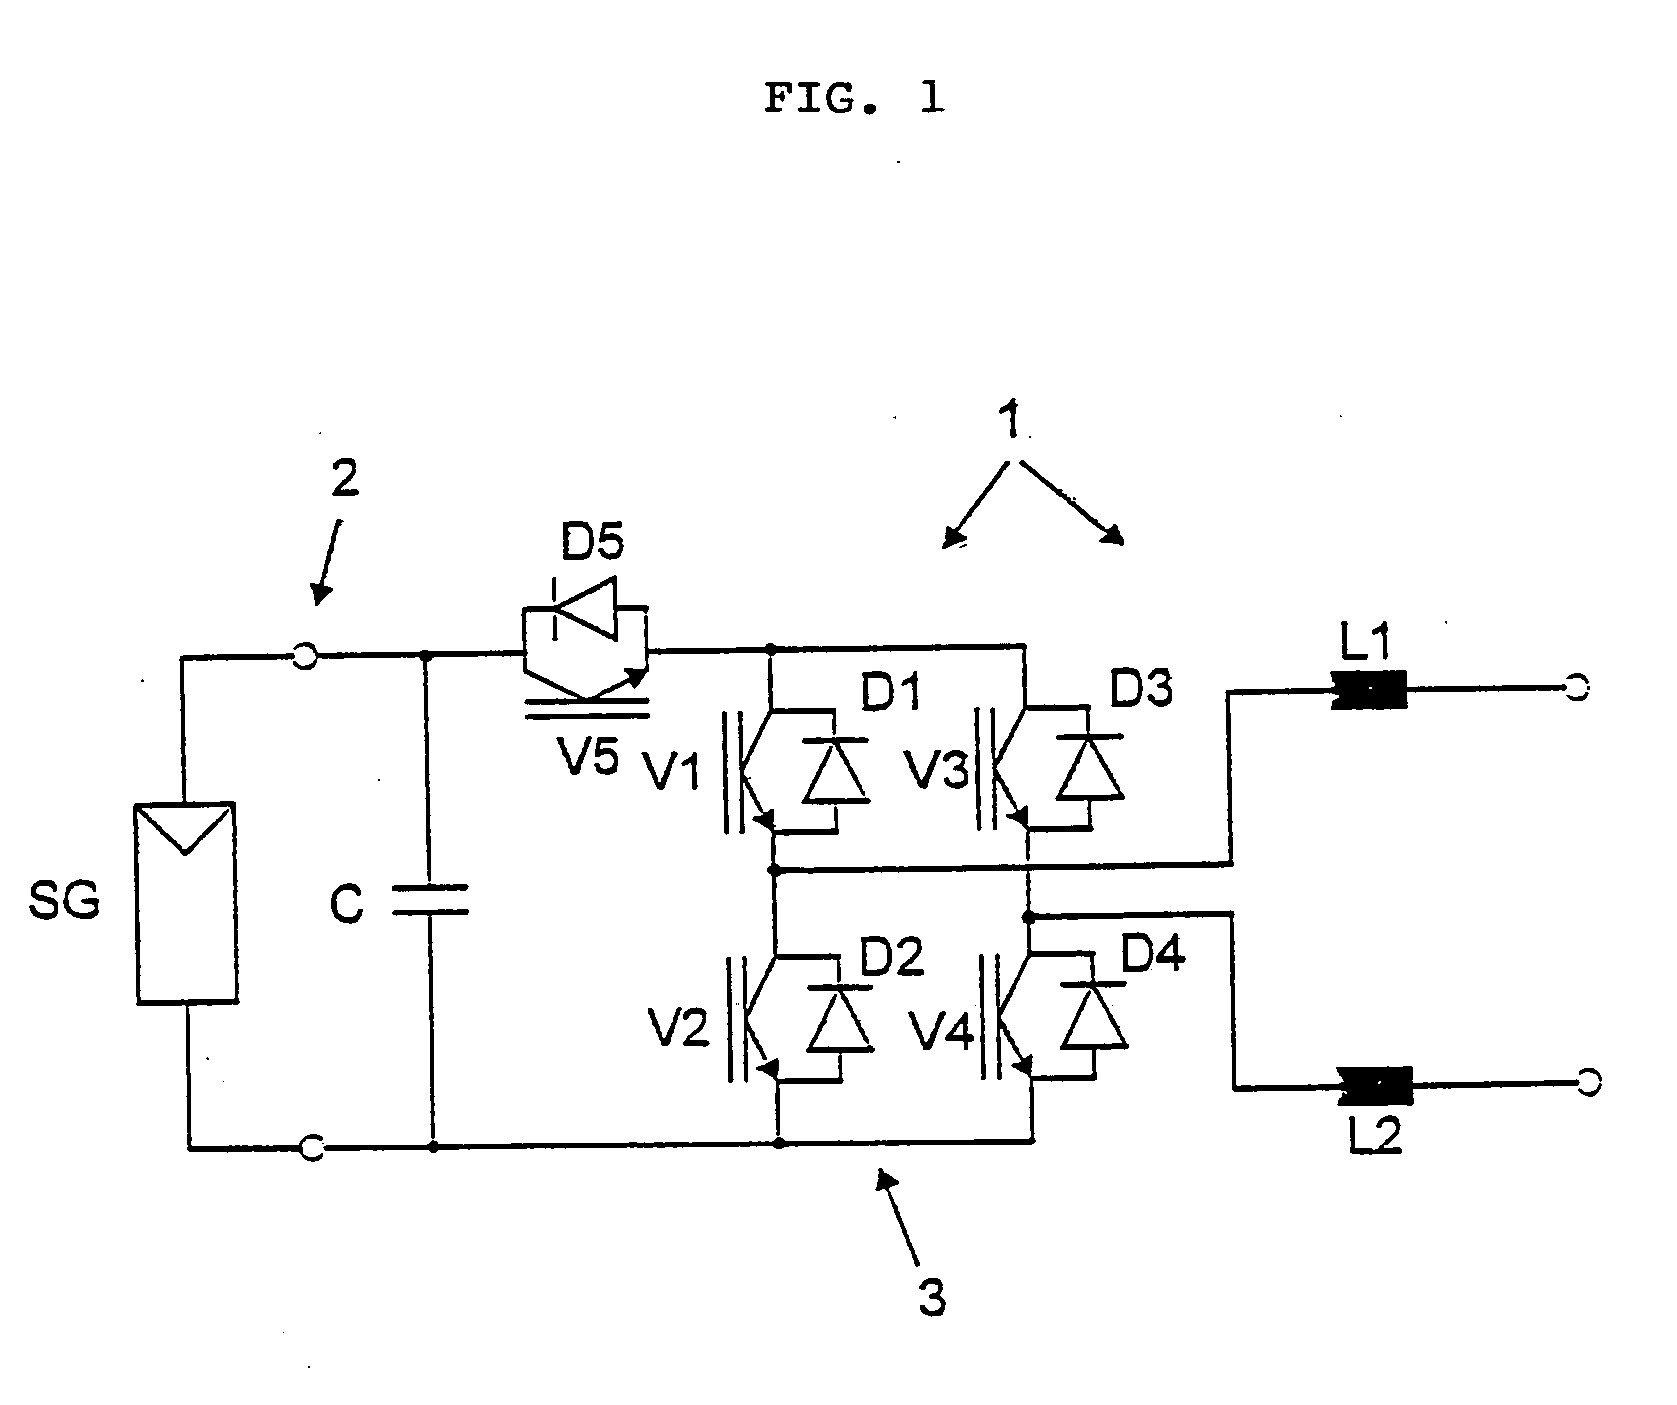 Method of converting a direct current voltage from a source of direct current voltage, more specifically from a photovoltaic couse of direct current voltage, into a alternating current voltage